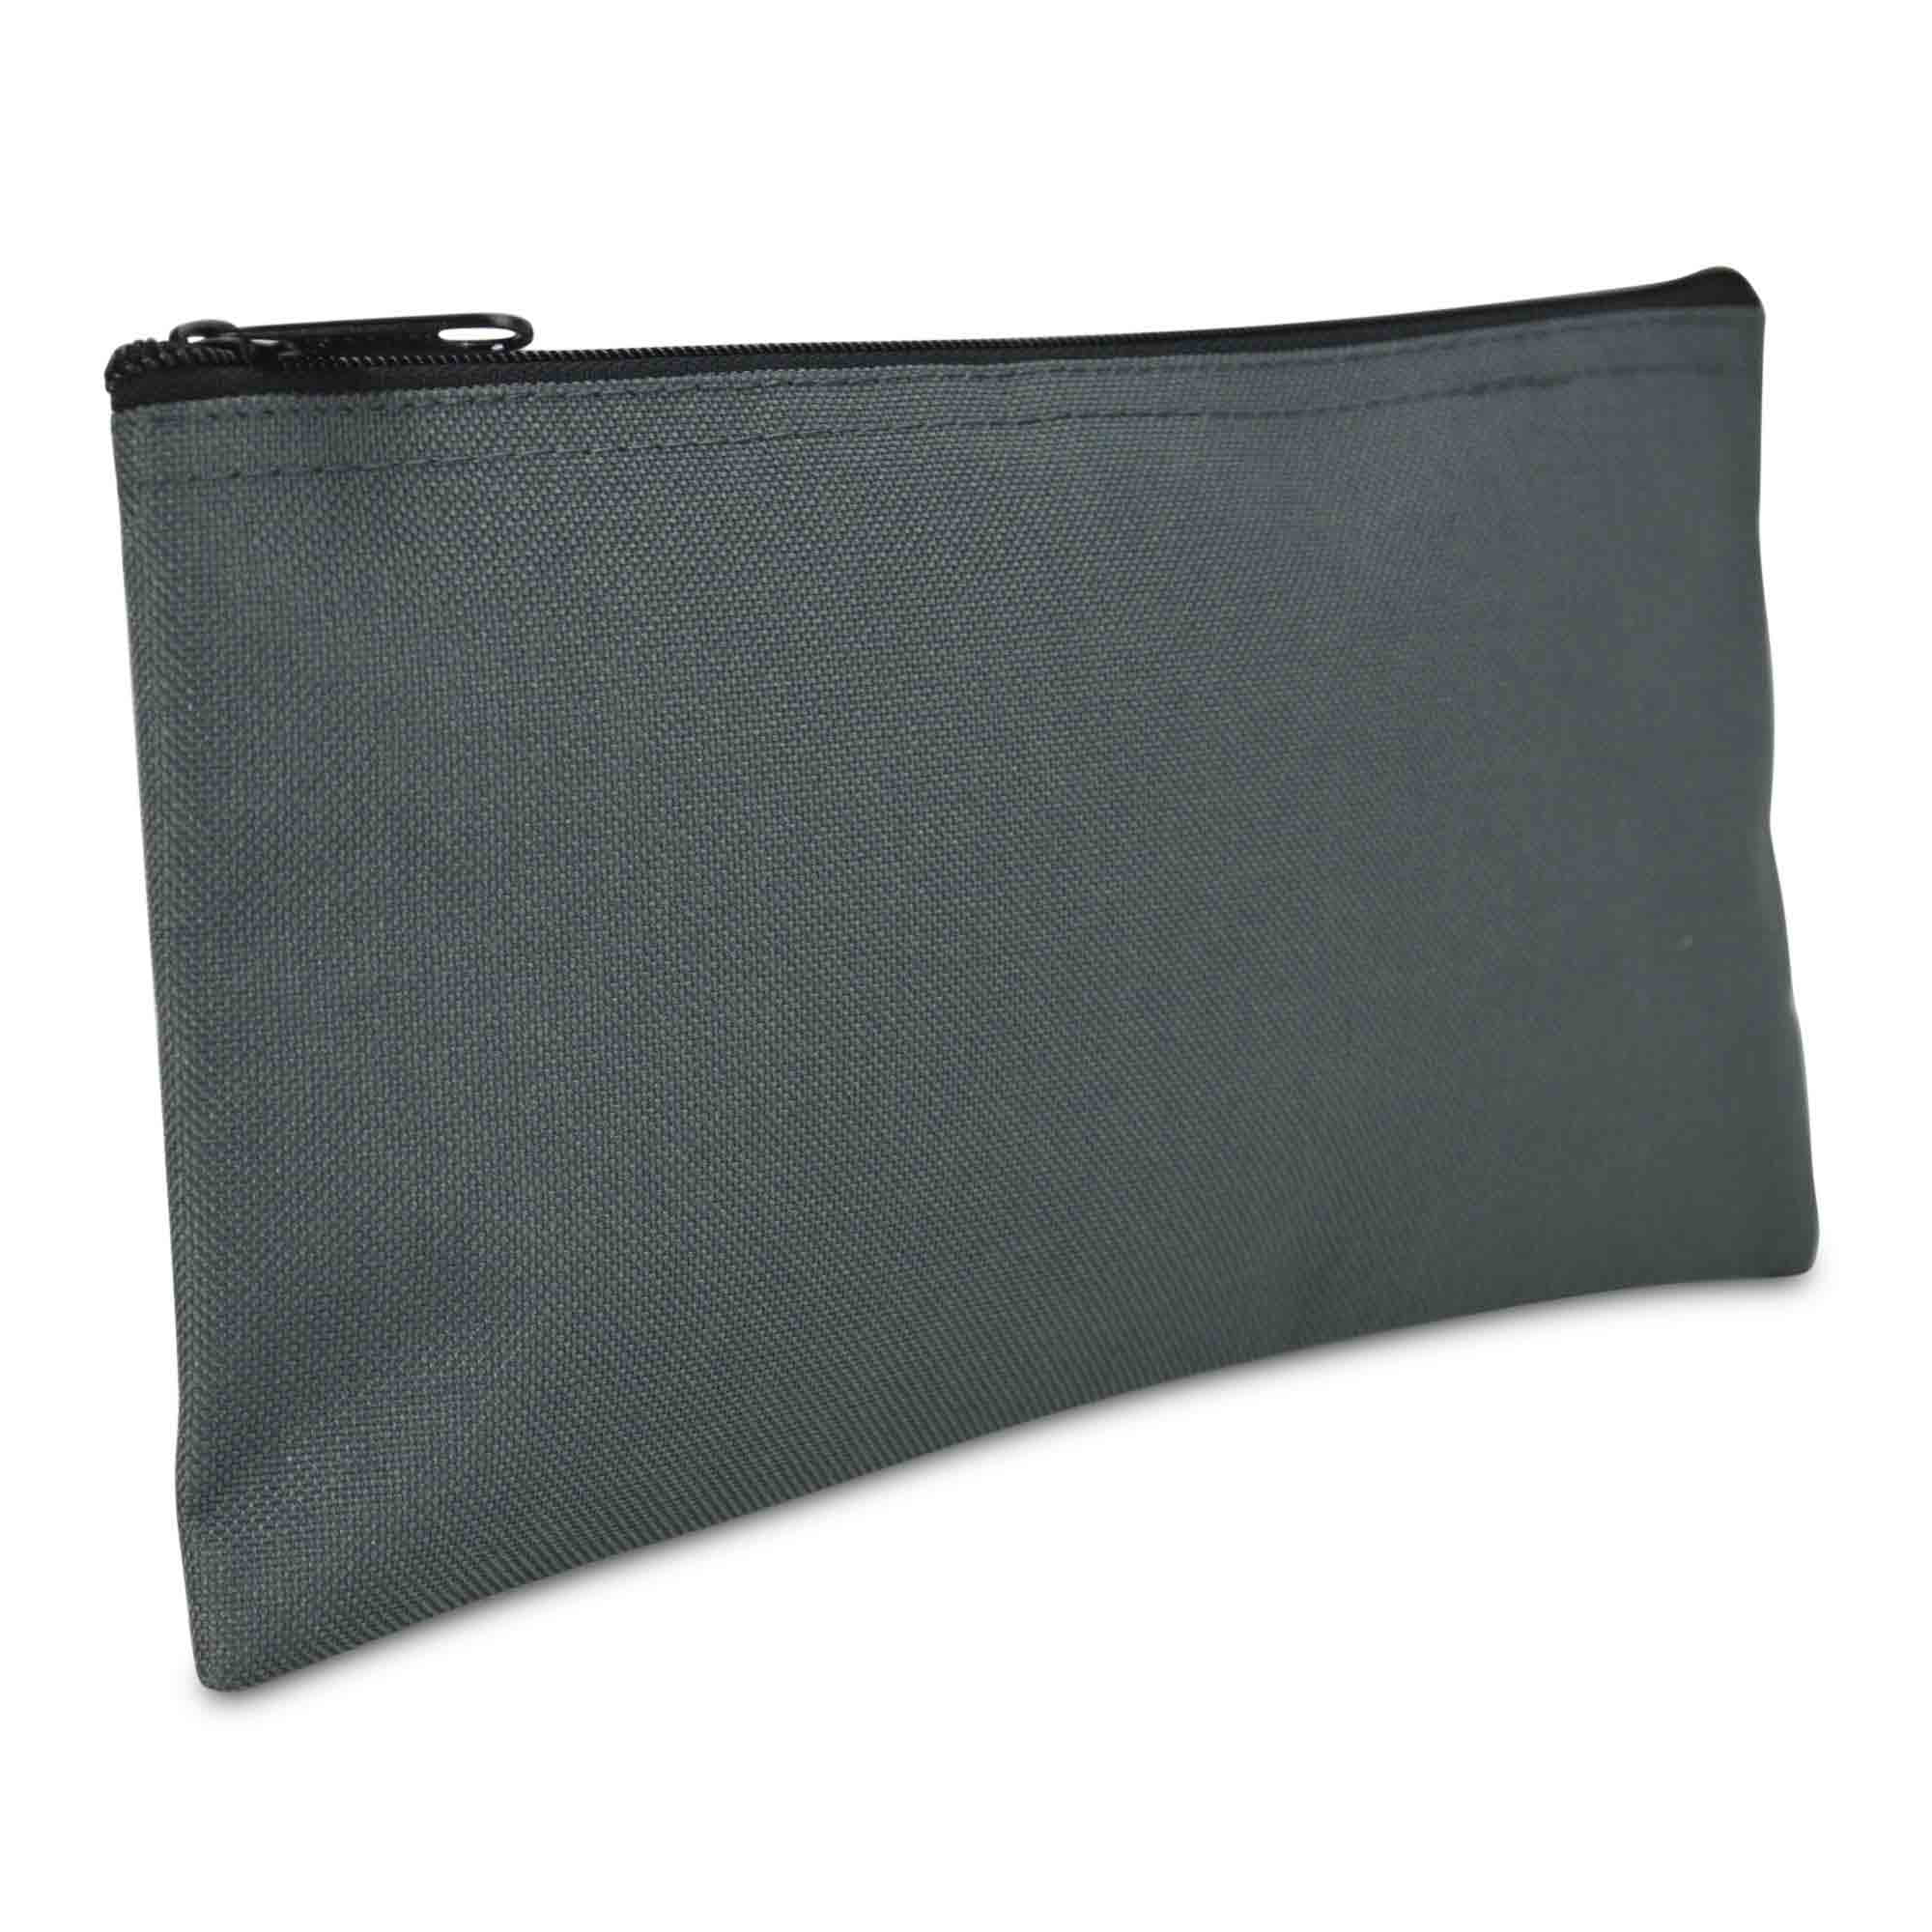 DALIX Bank Bags Money Pouch Security Deposit Utility Zipper Coin Bag in Gray - www.semashow.com